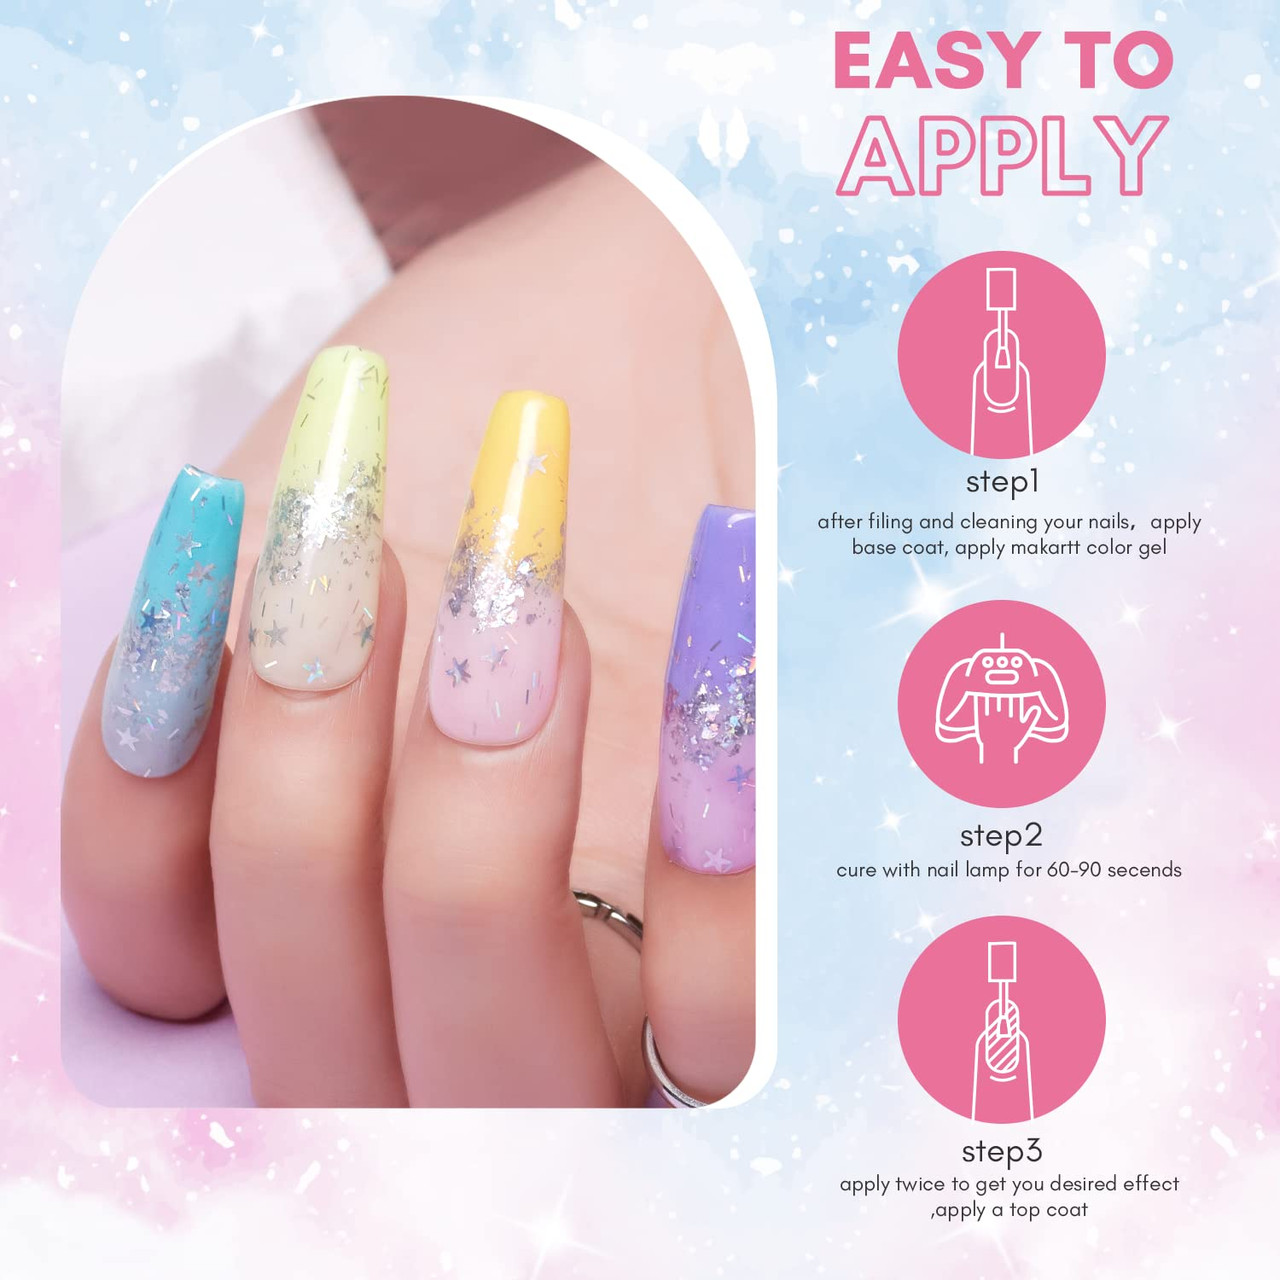 UR SUGAR 7ml Jelly Pink Translucent Pink Nail Polish Semi Transparent, UV  LED, Colorful Milky White Manicure Gel Varnishes From Dang09, $9.19 |  DHgate.Com